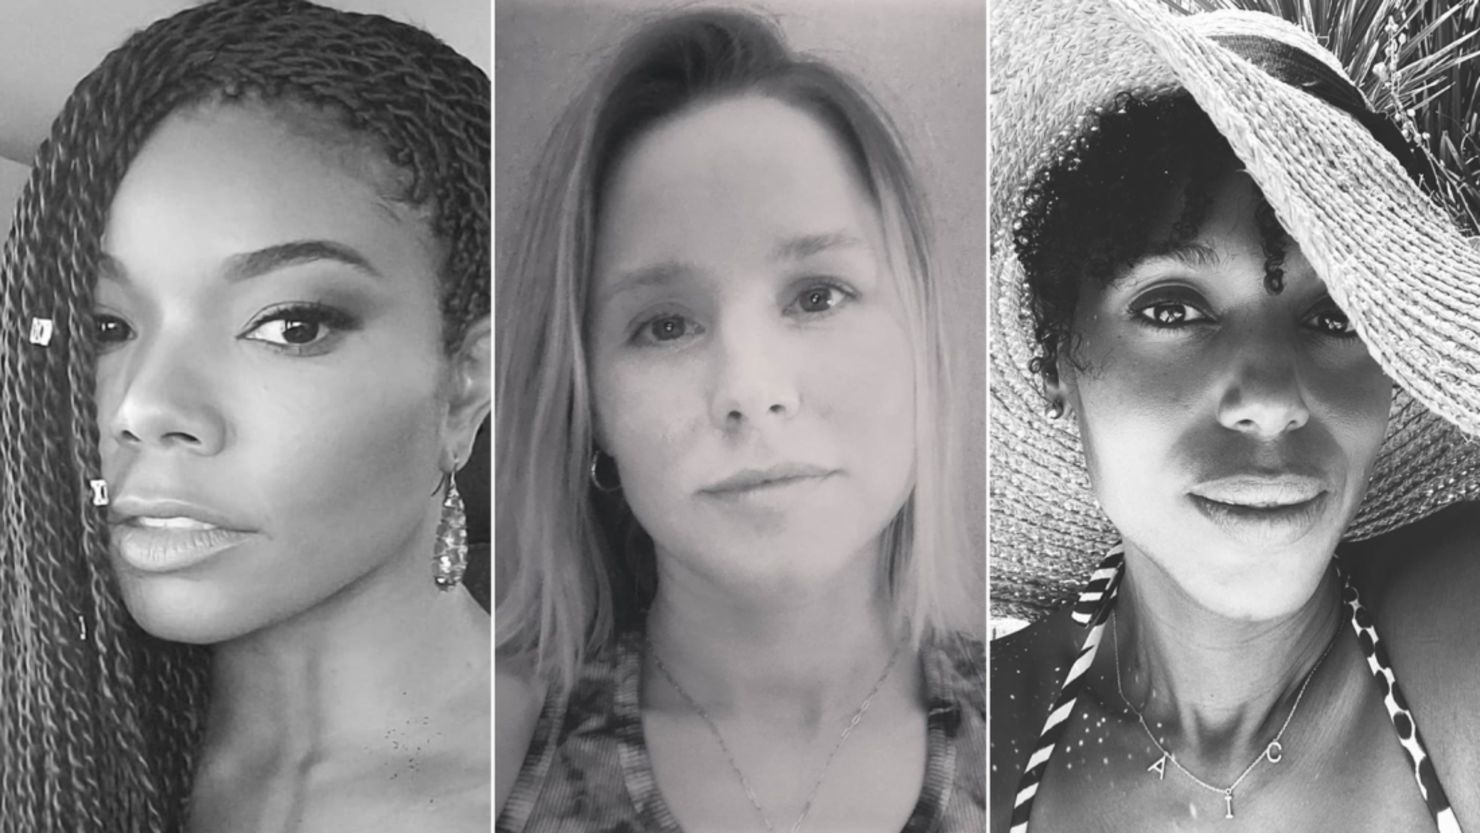 Celebrities and Instagram users are posting black-and-white images in support of women's empowerment with the caption "Challenge accepted." 